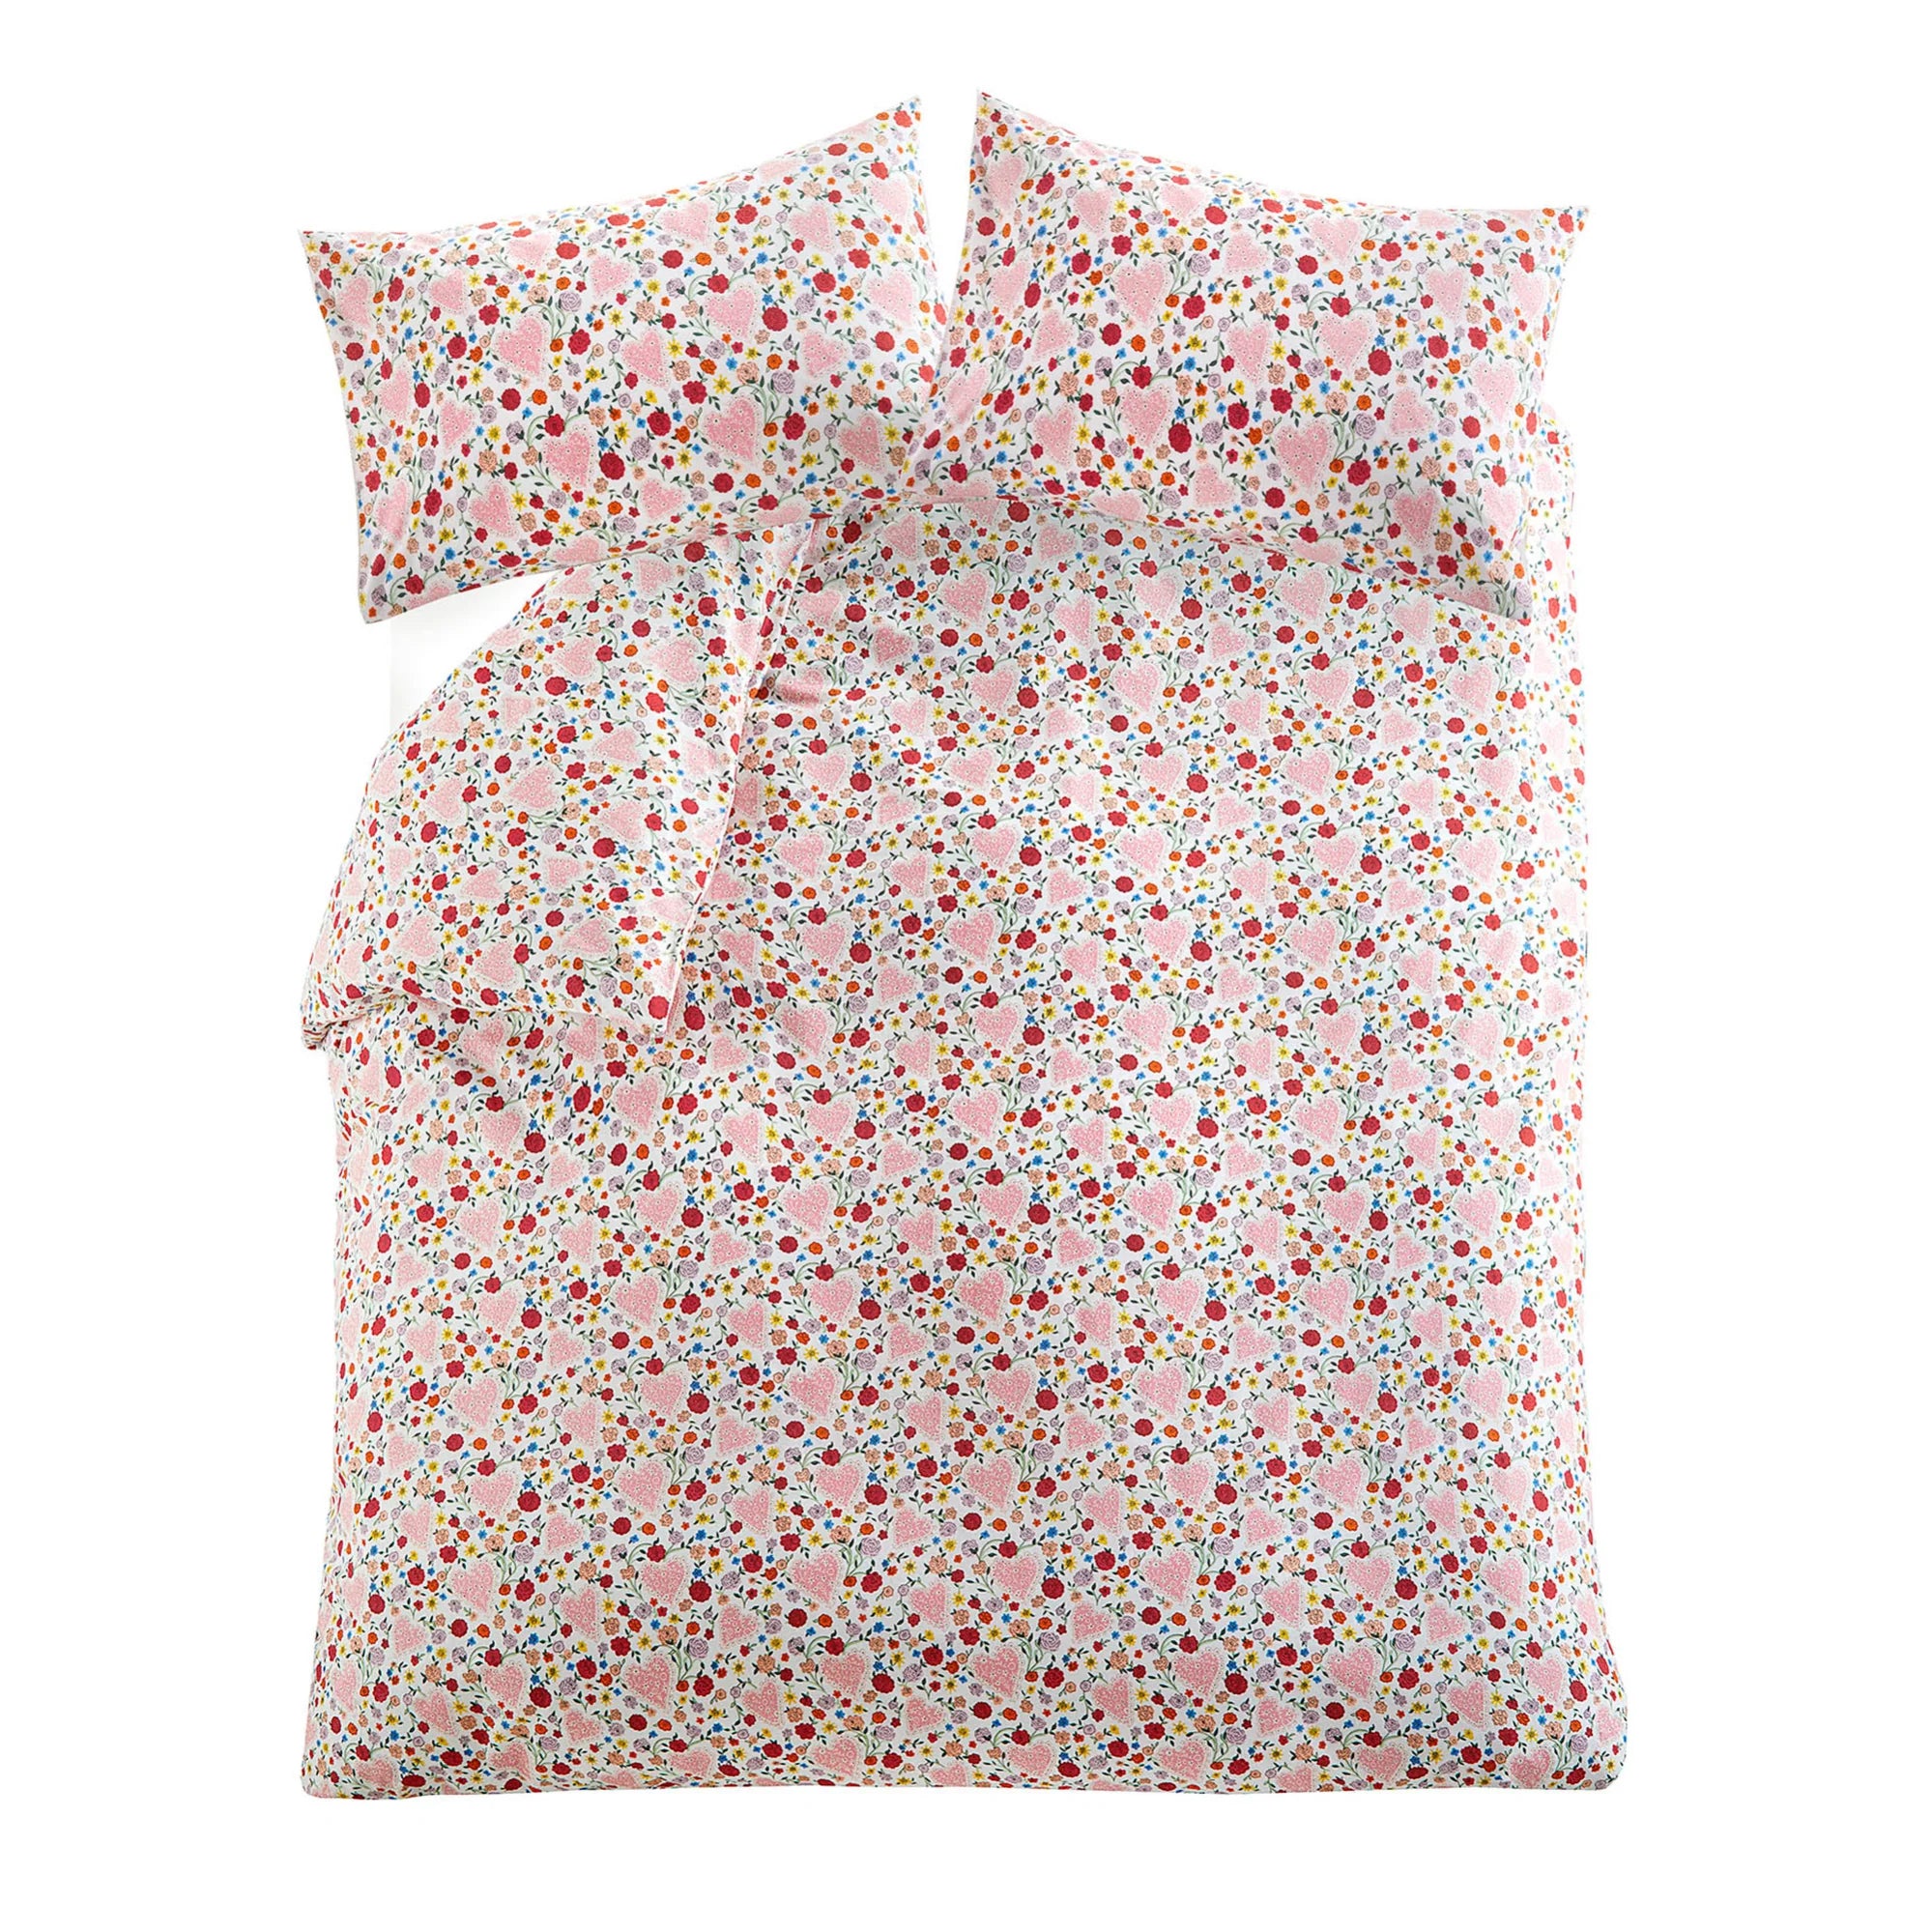 Cath Kidston Floral Heart Duvet Cover Set - Frill Pink